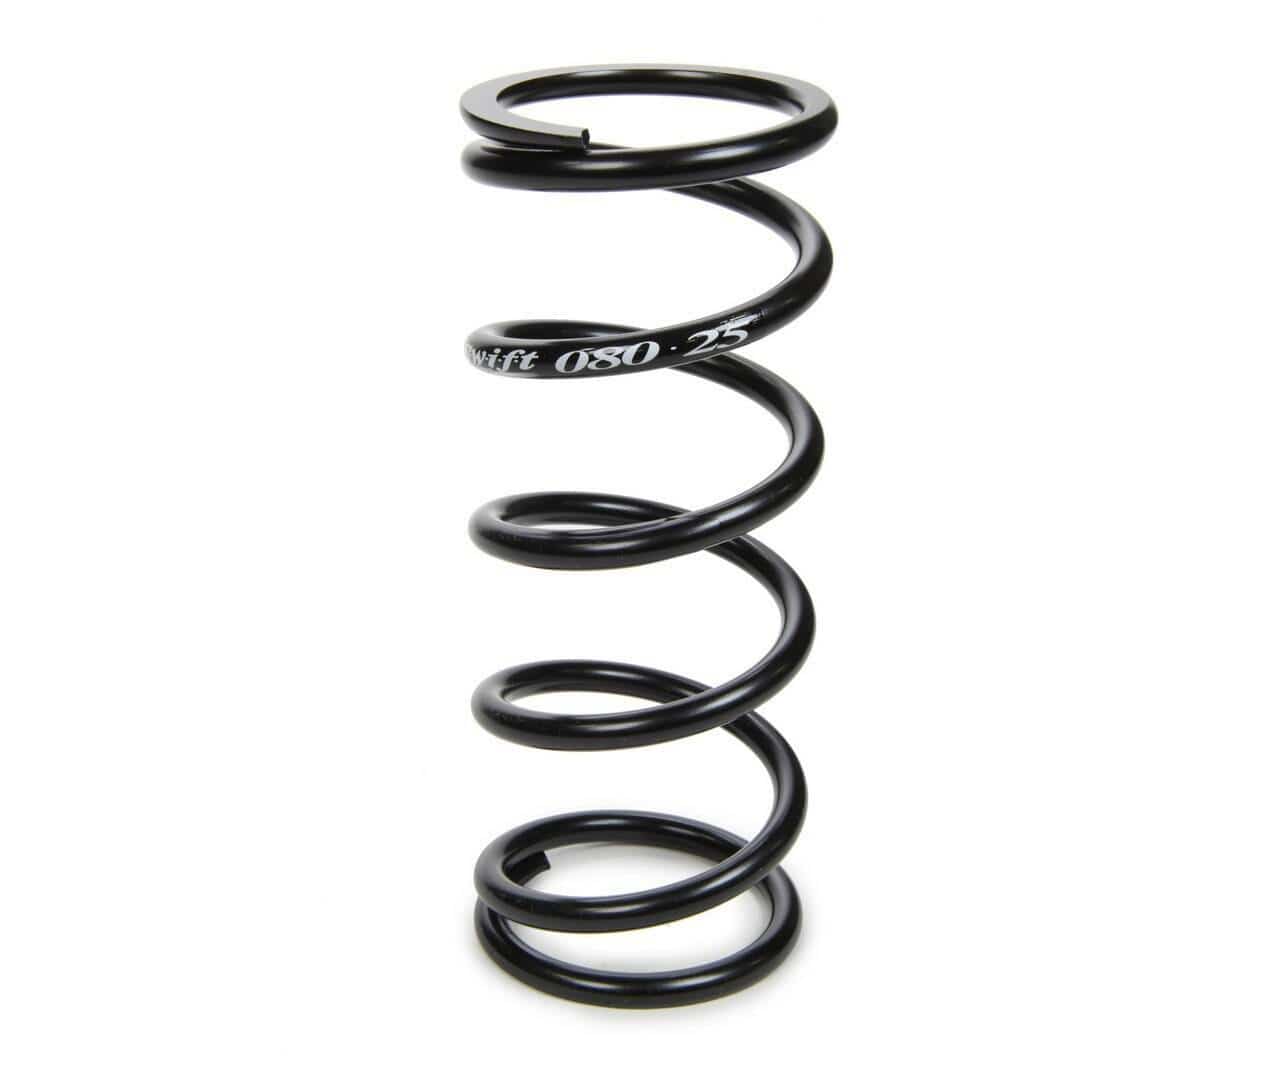 Swift Springs Standard Coilover Spring (Barrel Type) - ID 2.5", 12" Length